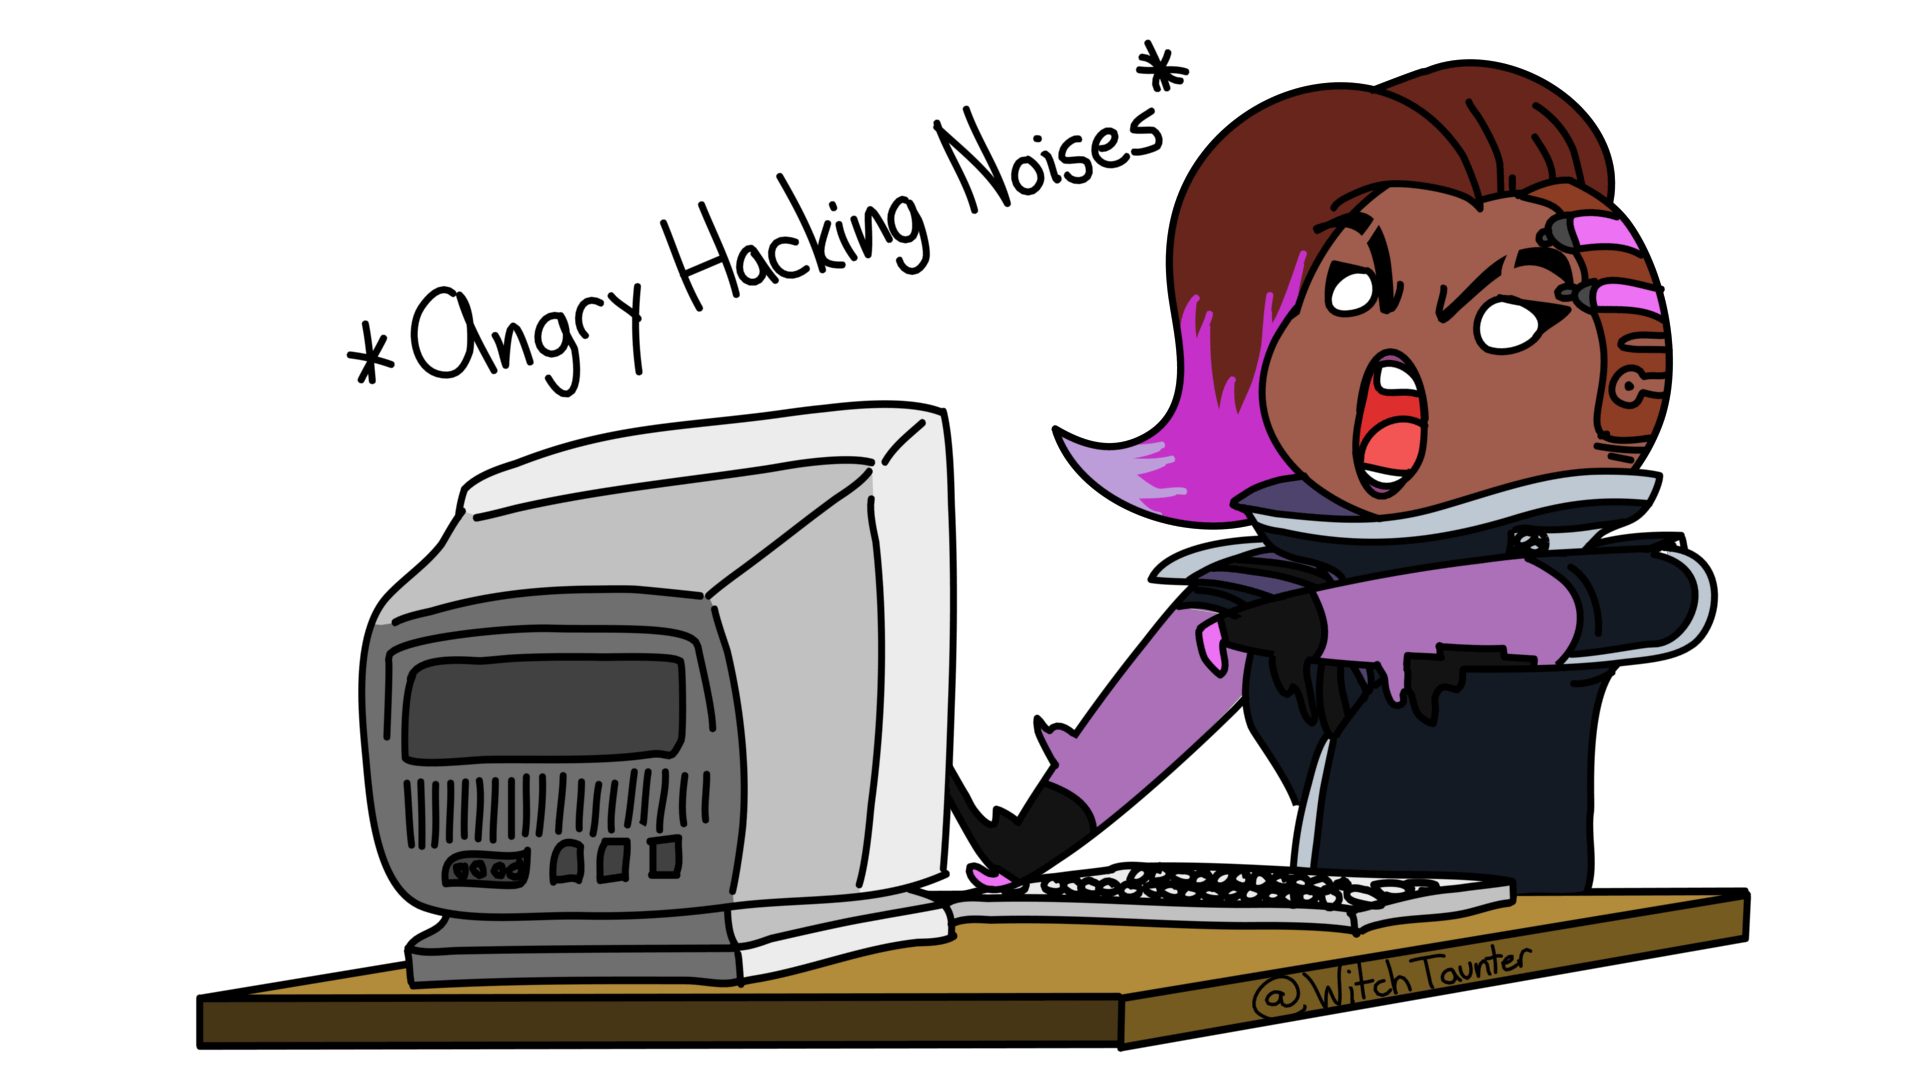 Angry Hacking Noises